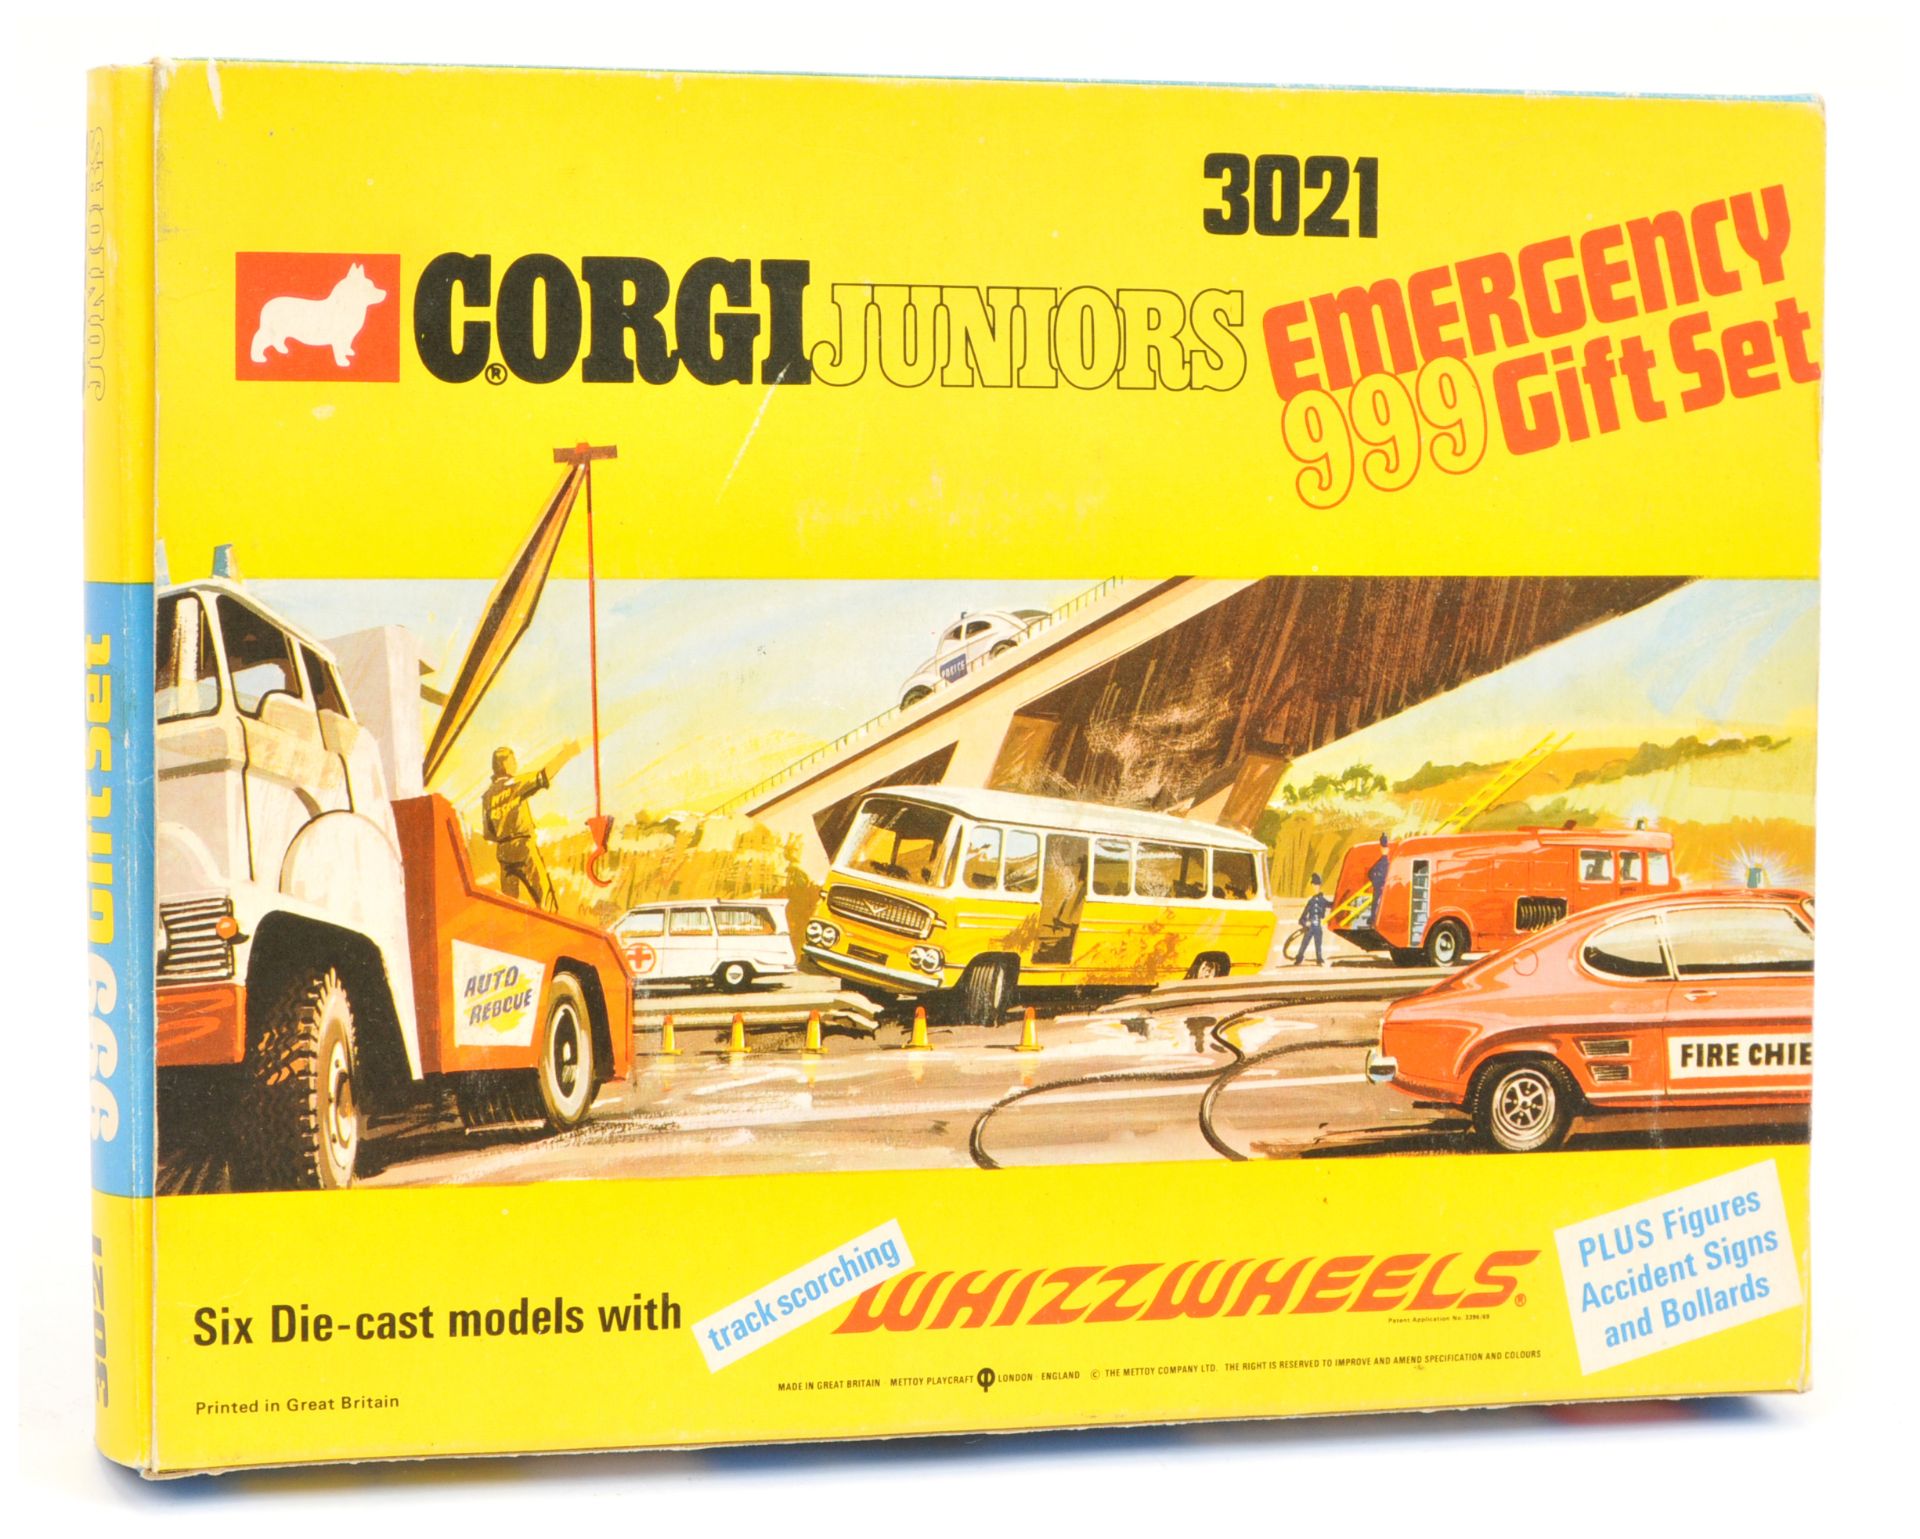 Corgi Toys Juniors 3021 "Emergency 999" Gift Set To Include 6 Pieces - Ford Holmes Wrecker, Ford ... - Image 2 of 2